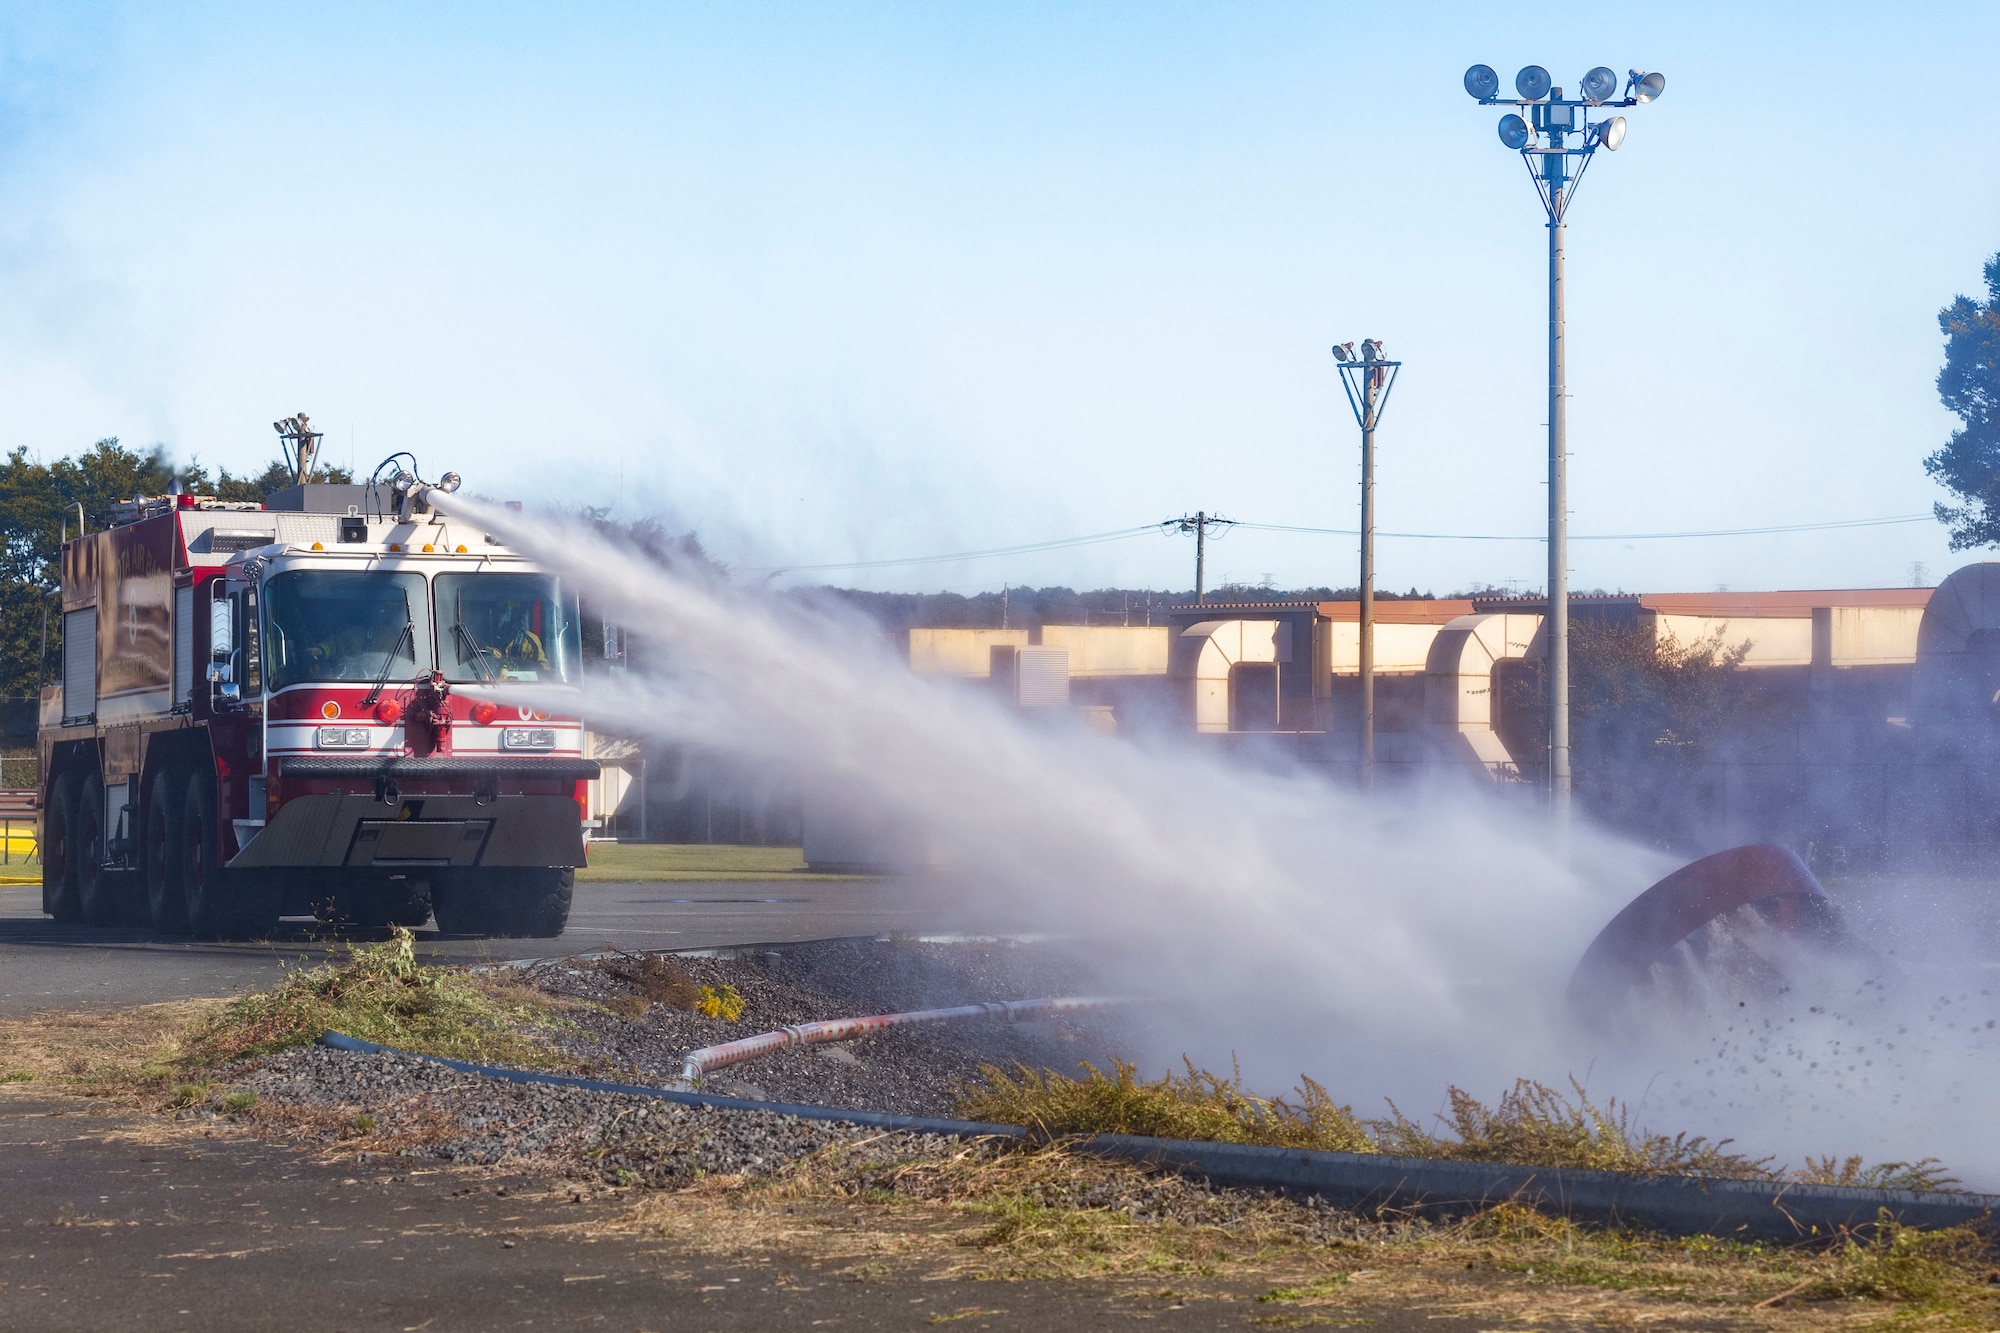 Firefighters from the 374th Civil Engineer Squadron use fire truck water cannons to put out an aircraft fire simulator during a bilateral training session with Japan Air Self-Defense Force firefighters at Yokota Air Base, Japan, Oct. 26, 2022.